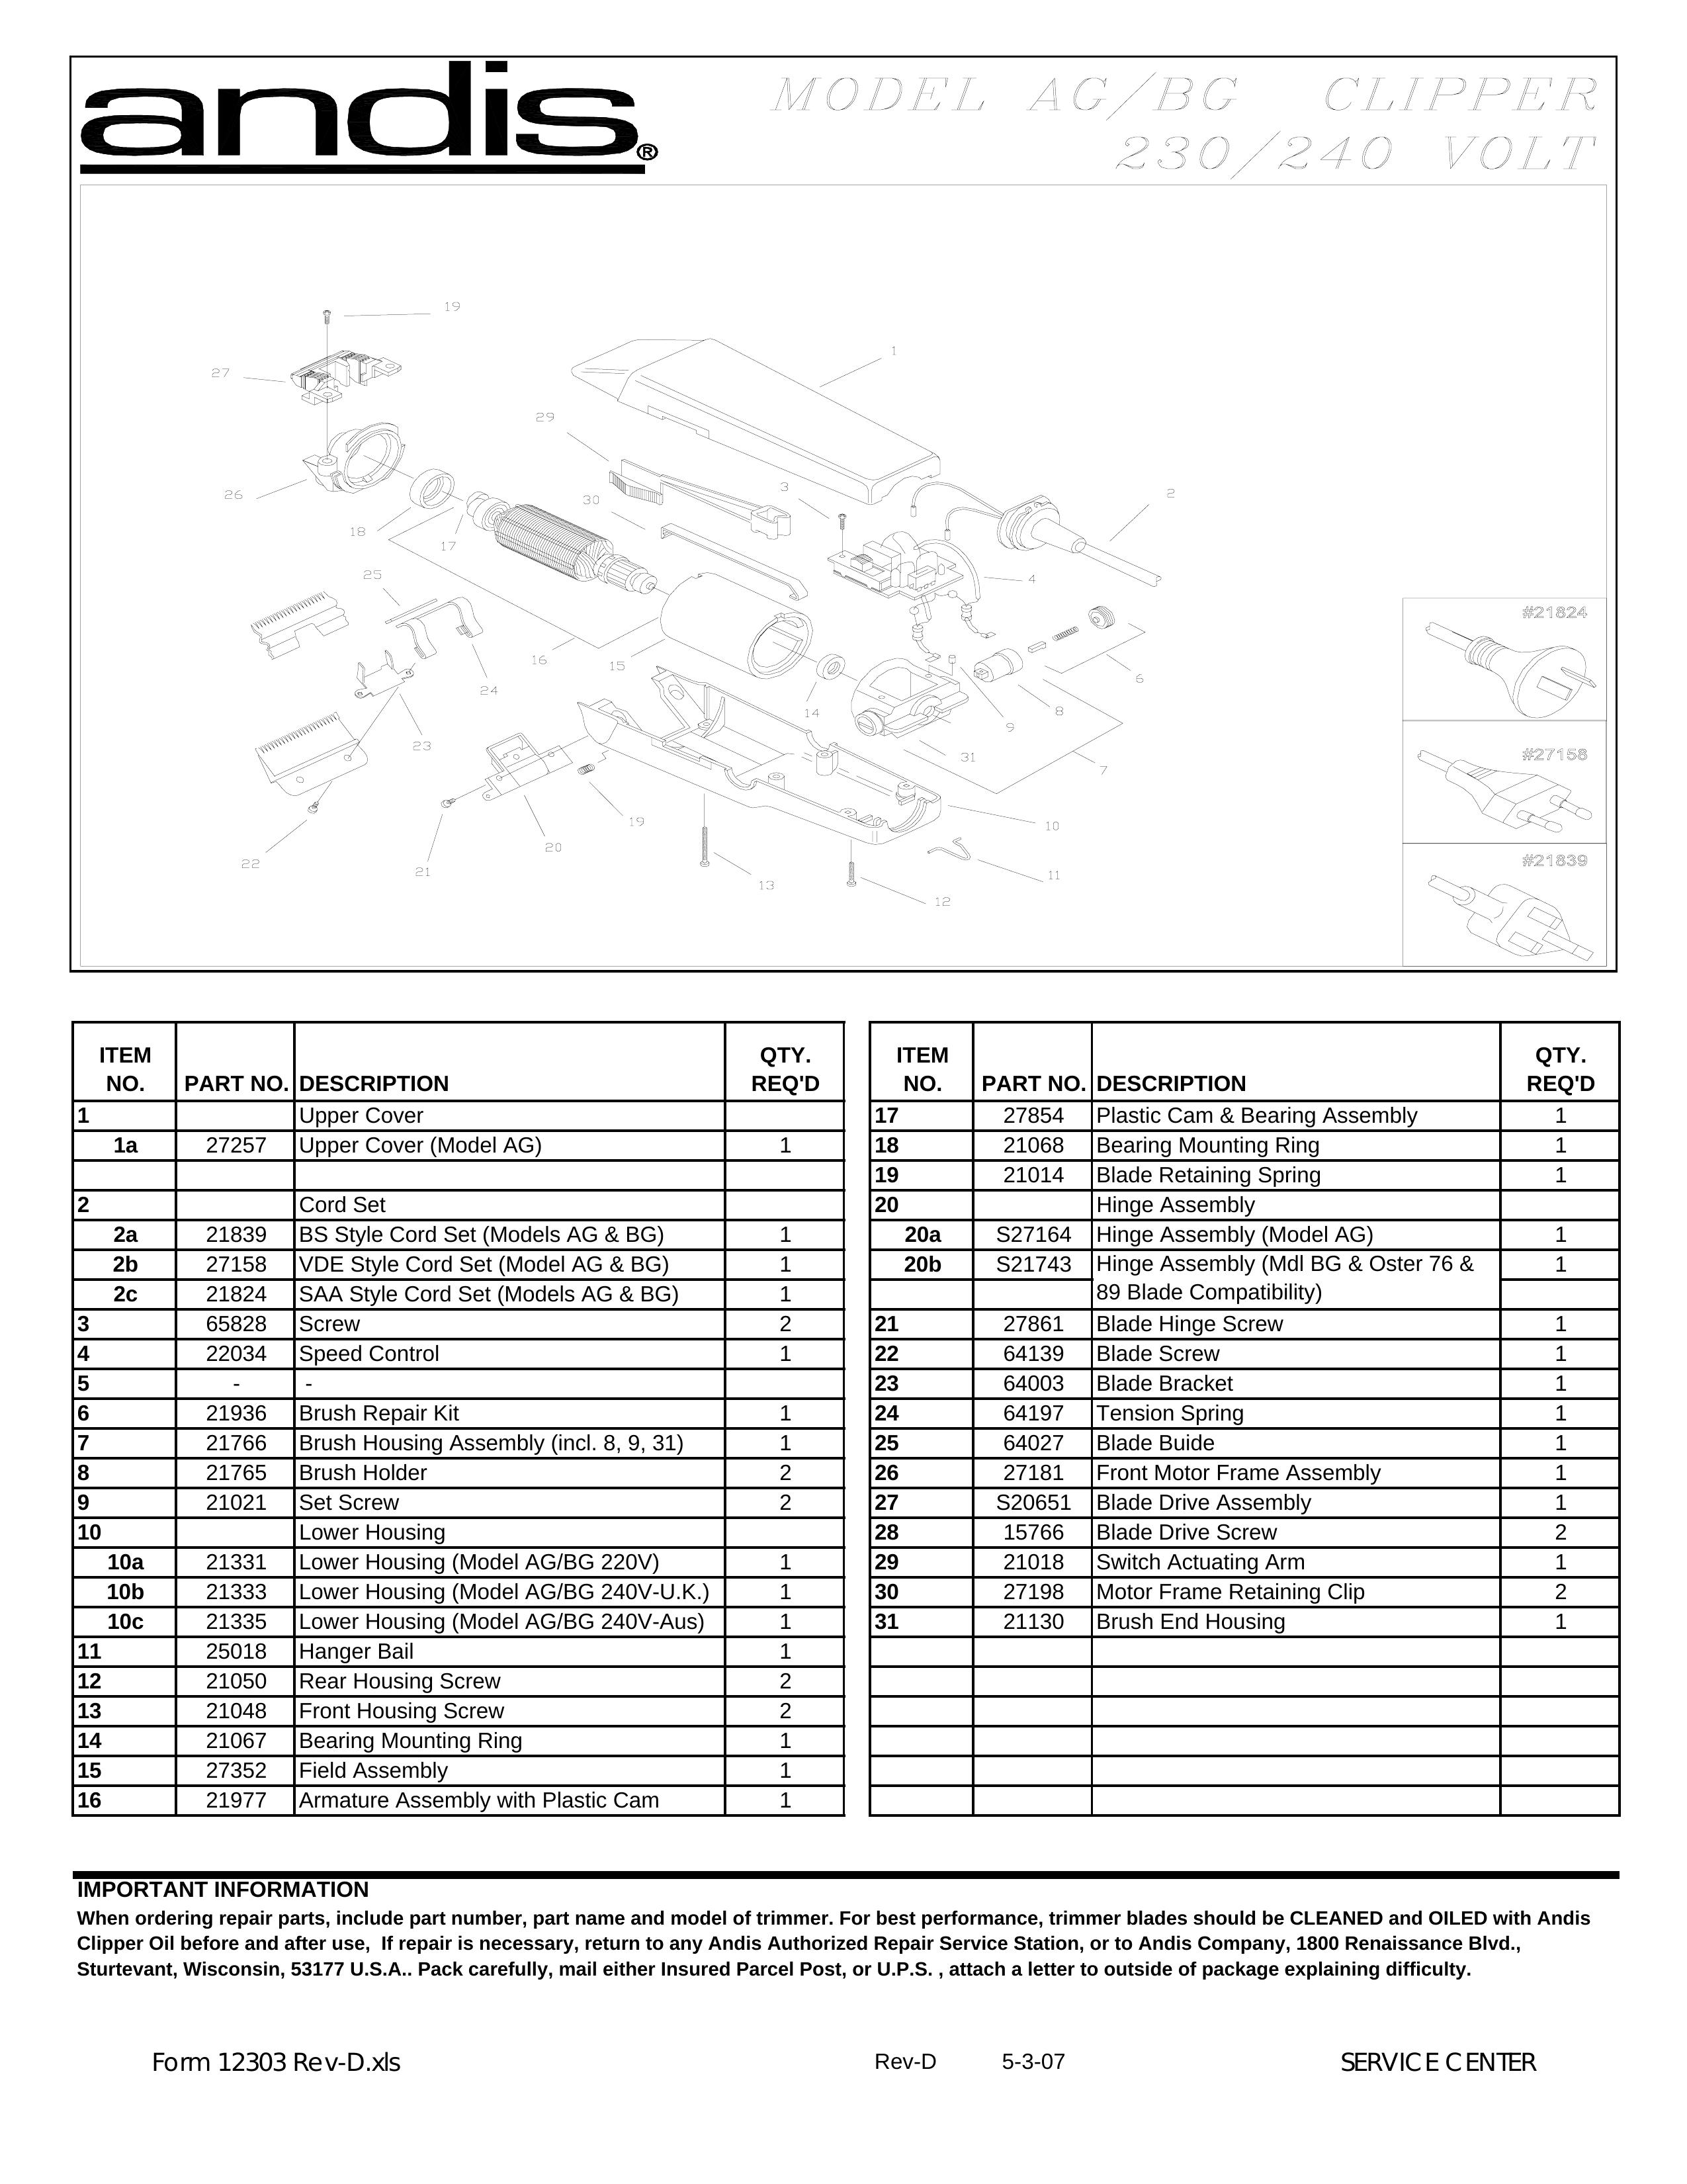 Andis Company BG Trimmer User Manual